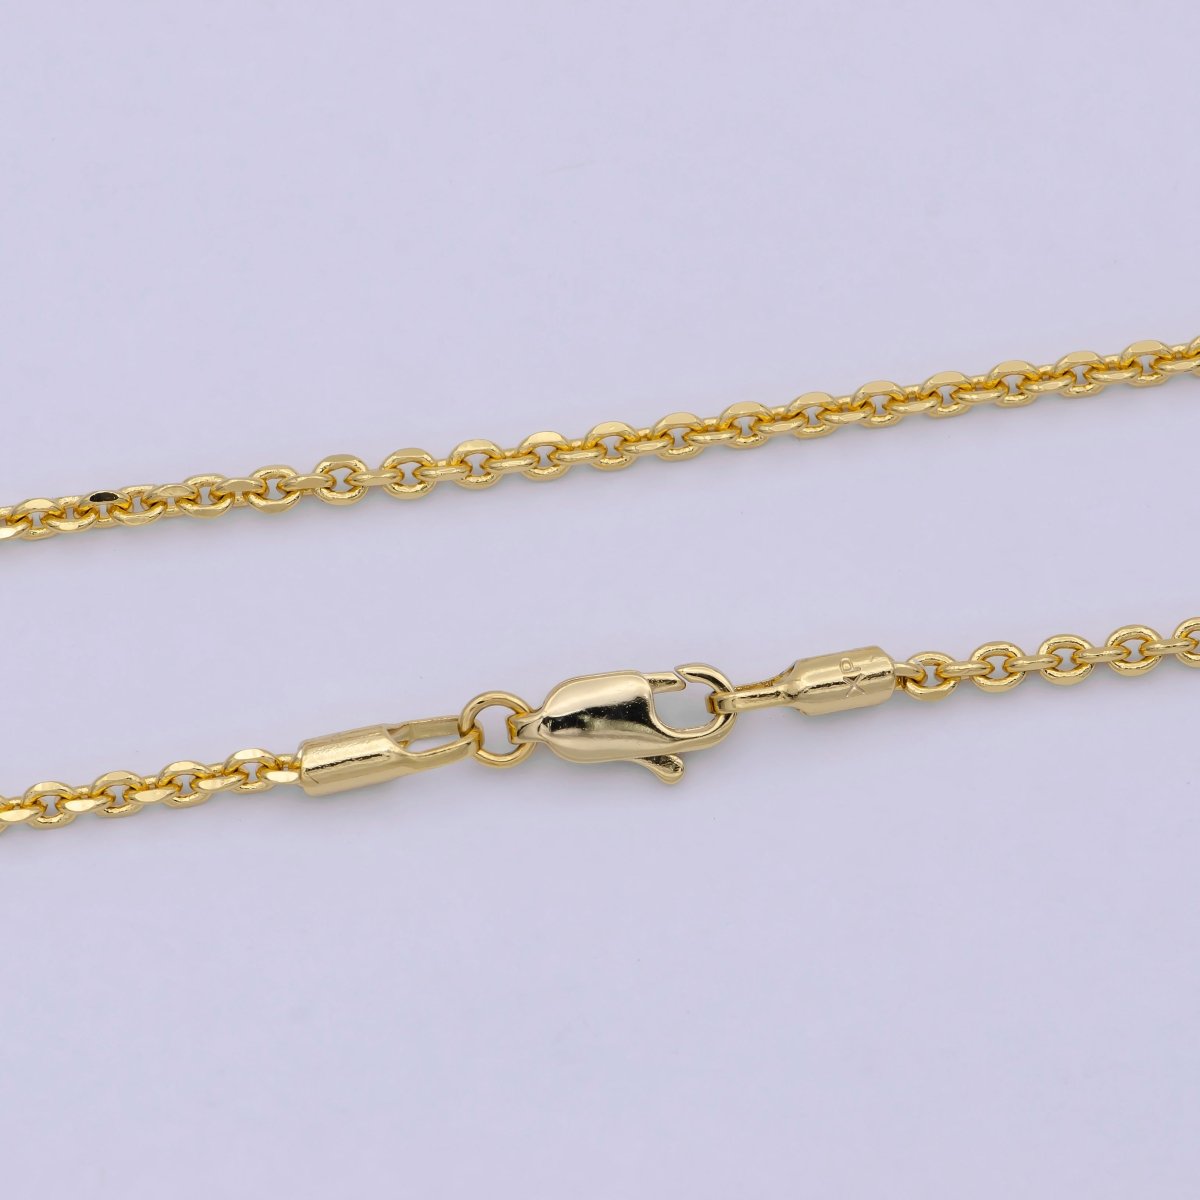 17.7'' Ready to Use 24K Gold Filled Thin Cable Necklace Chain, Layering Cable Chain Dainty Necklace, For Pendant Charm Necklace Making | WA-740 Clearance Pricing - DLUXCA